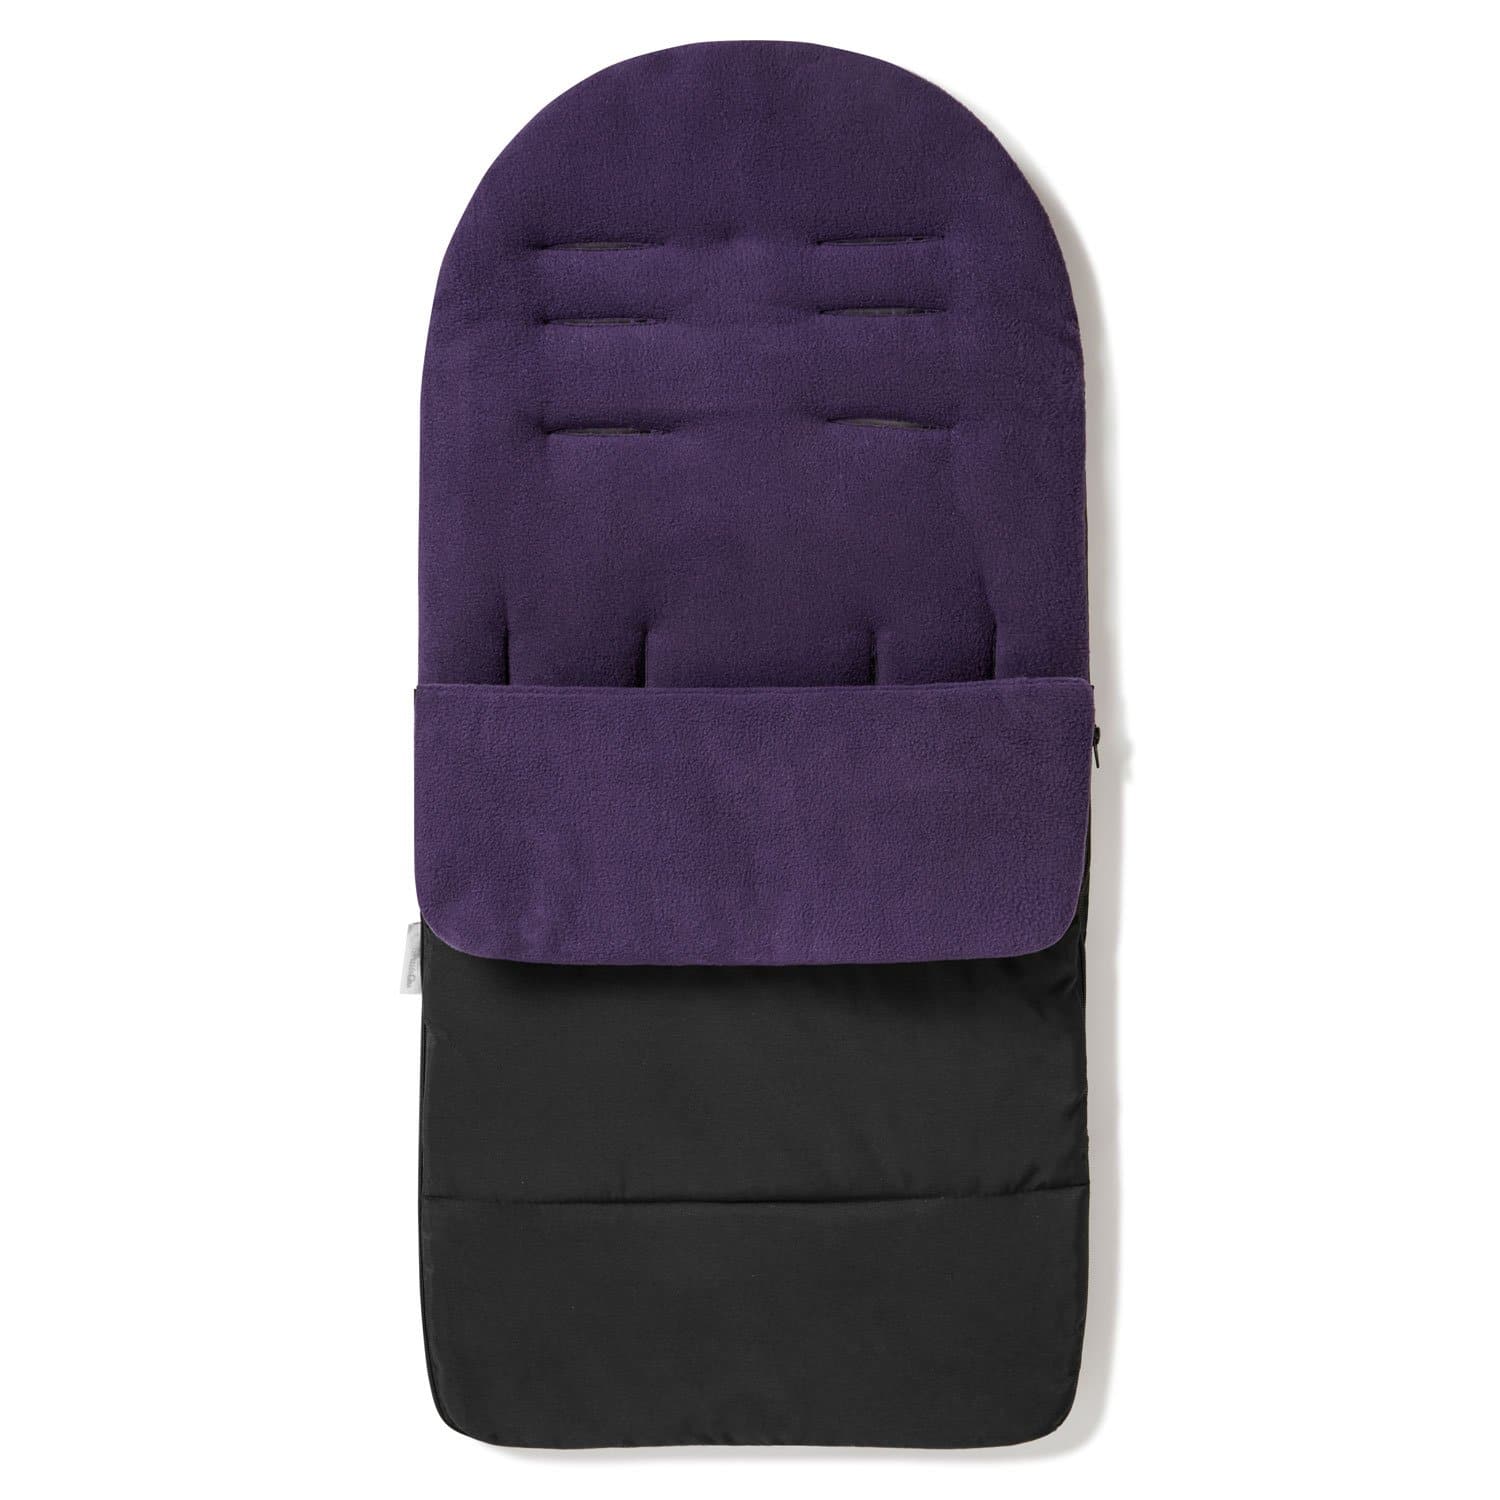 Premium Footmuff / Cosy Toes Compatible with Peg Perego - Plum Purple / Fits All Models | For Your Little One